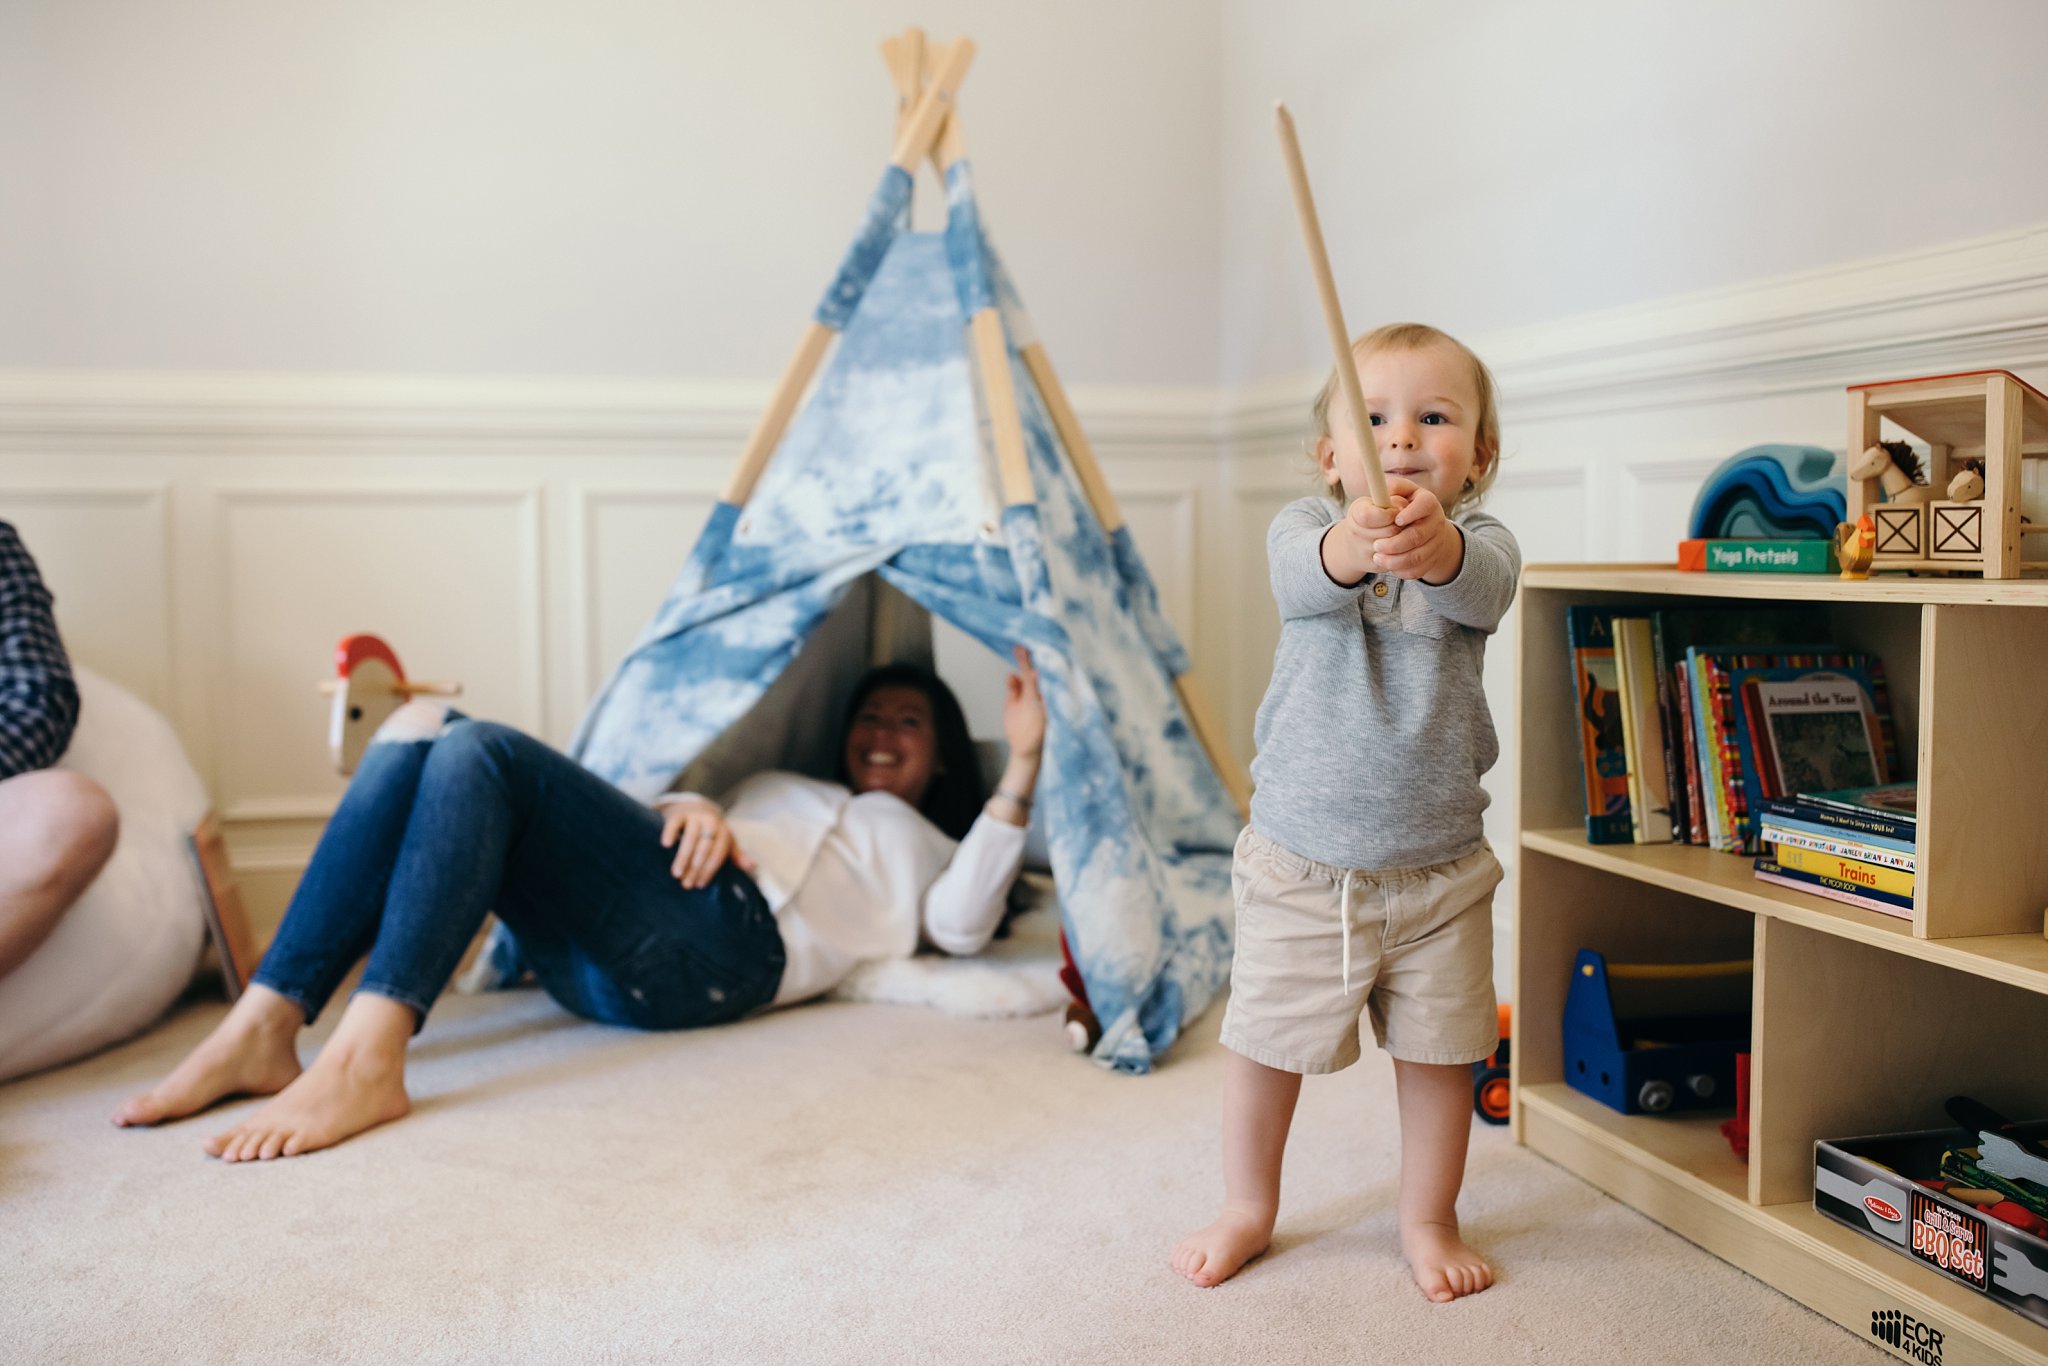 toddler boy playing with a stick in playroom with blue teepee in background